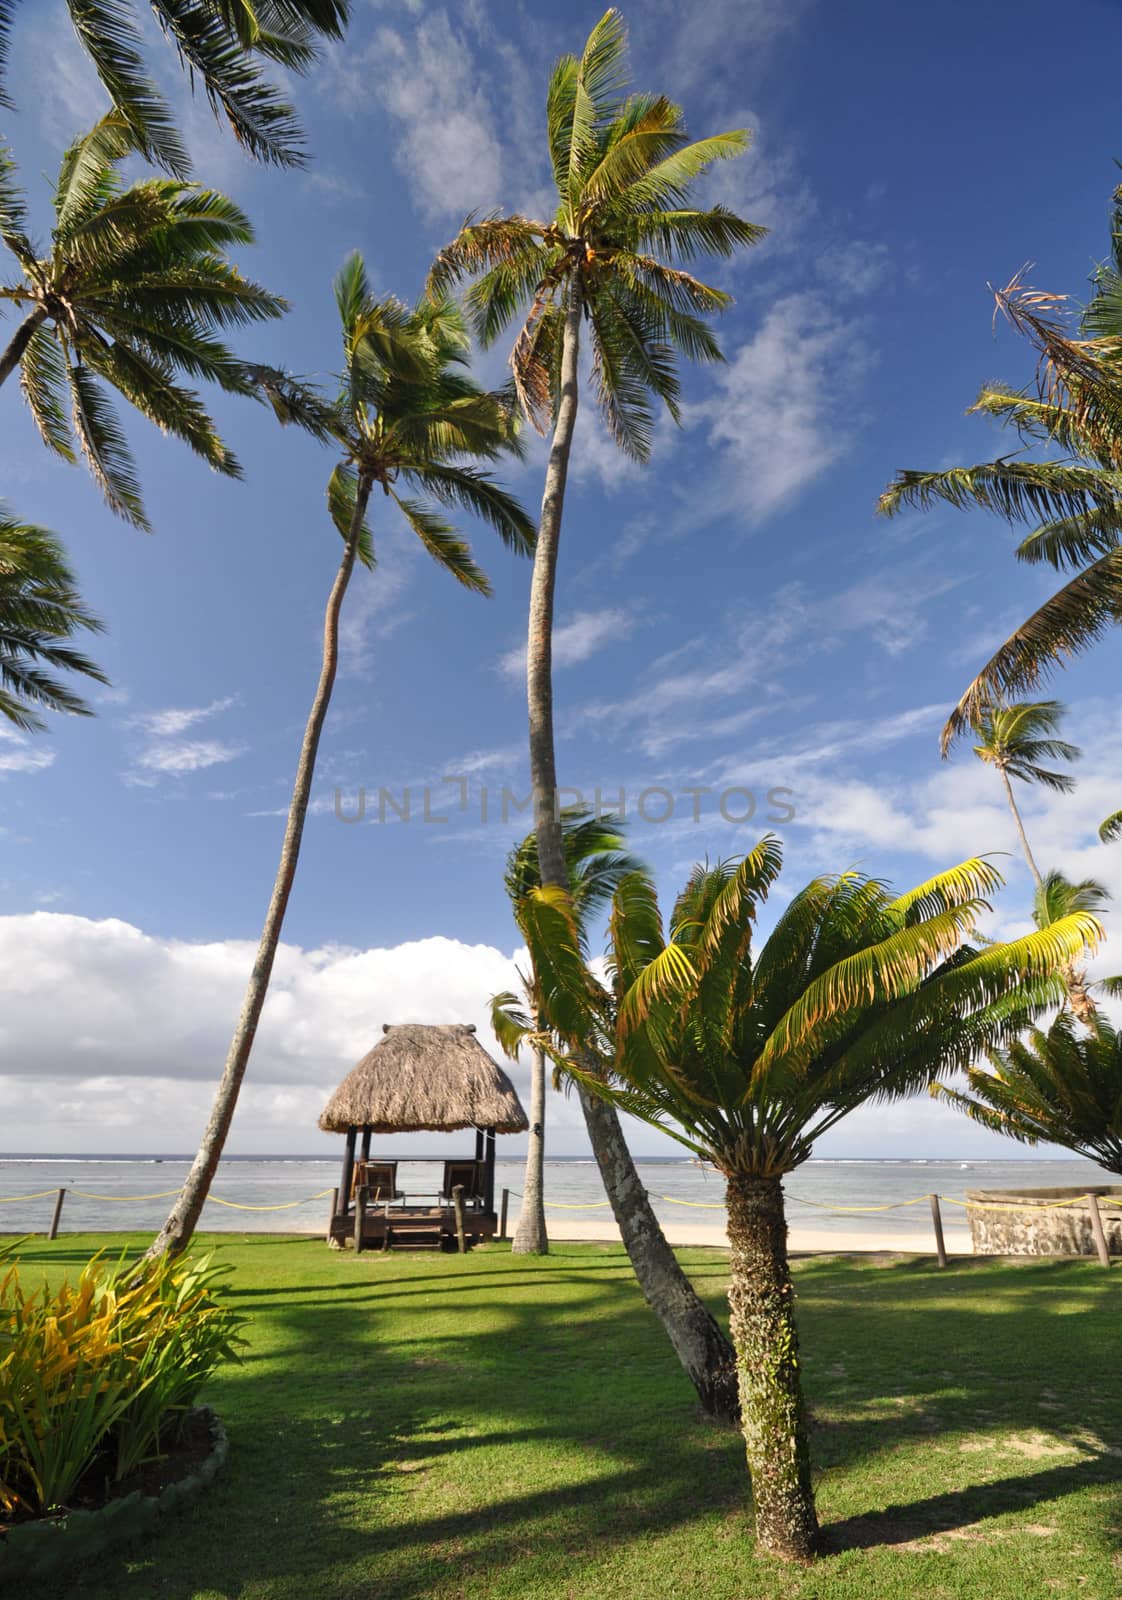 The tranquil beaches of the  South Pacific Ocean really are paradise found. This thatched beach hut overlooks the Coral Coast on the island of Viti Levu (Fiji)